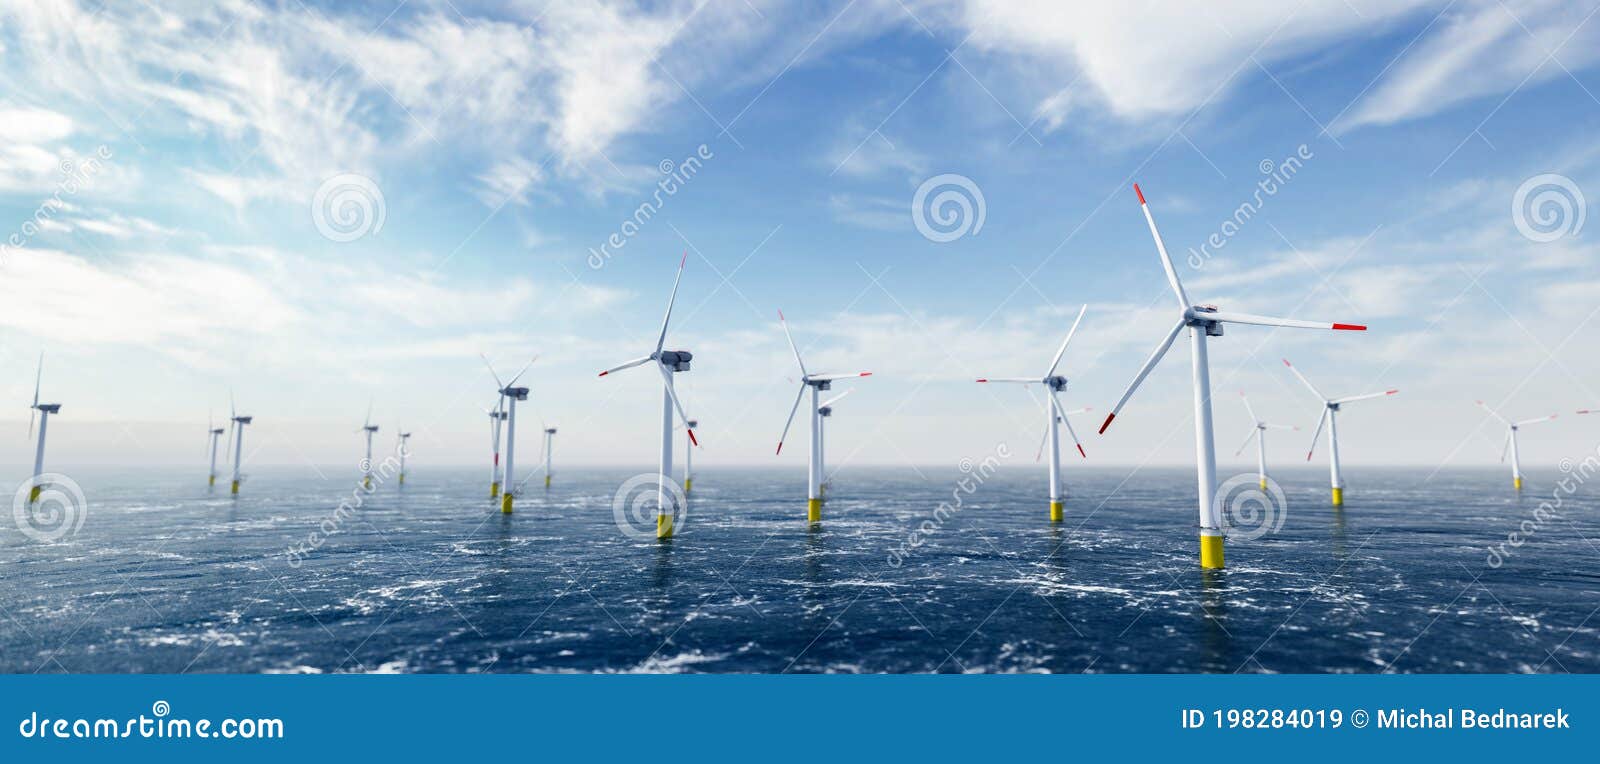 offshore wind power and energy farm with many wind turbines on the ocean